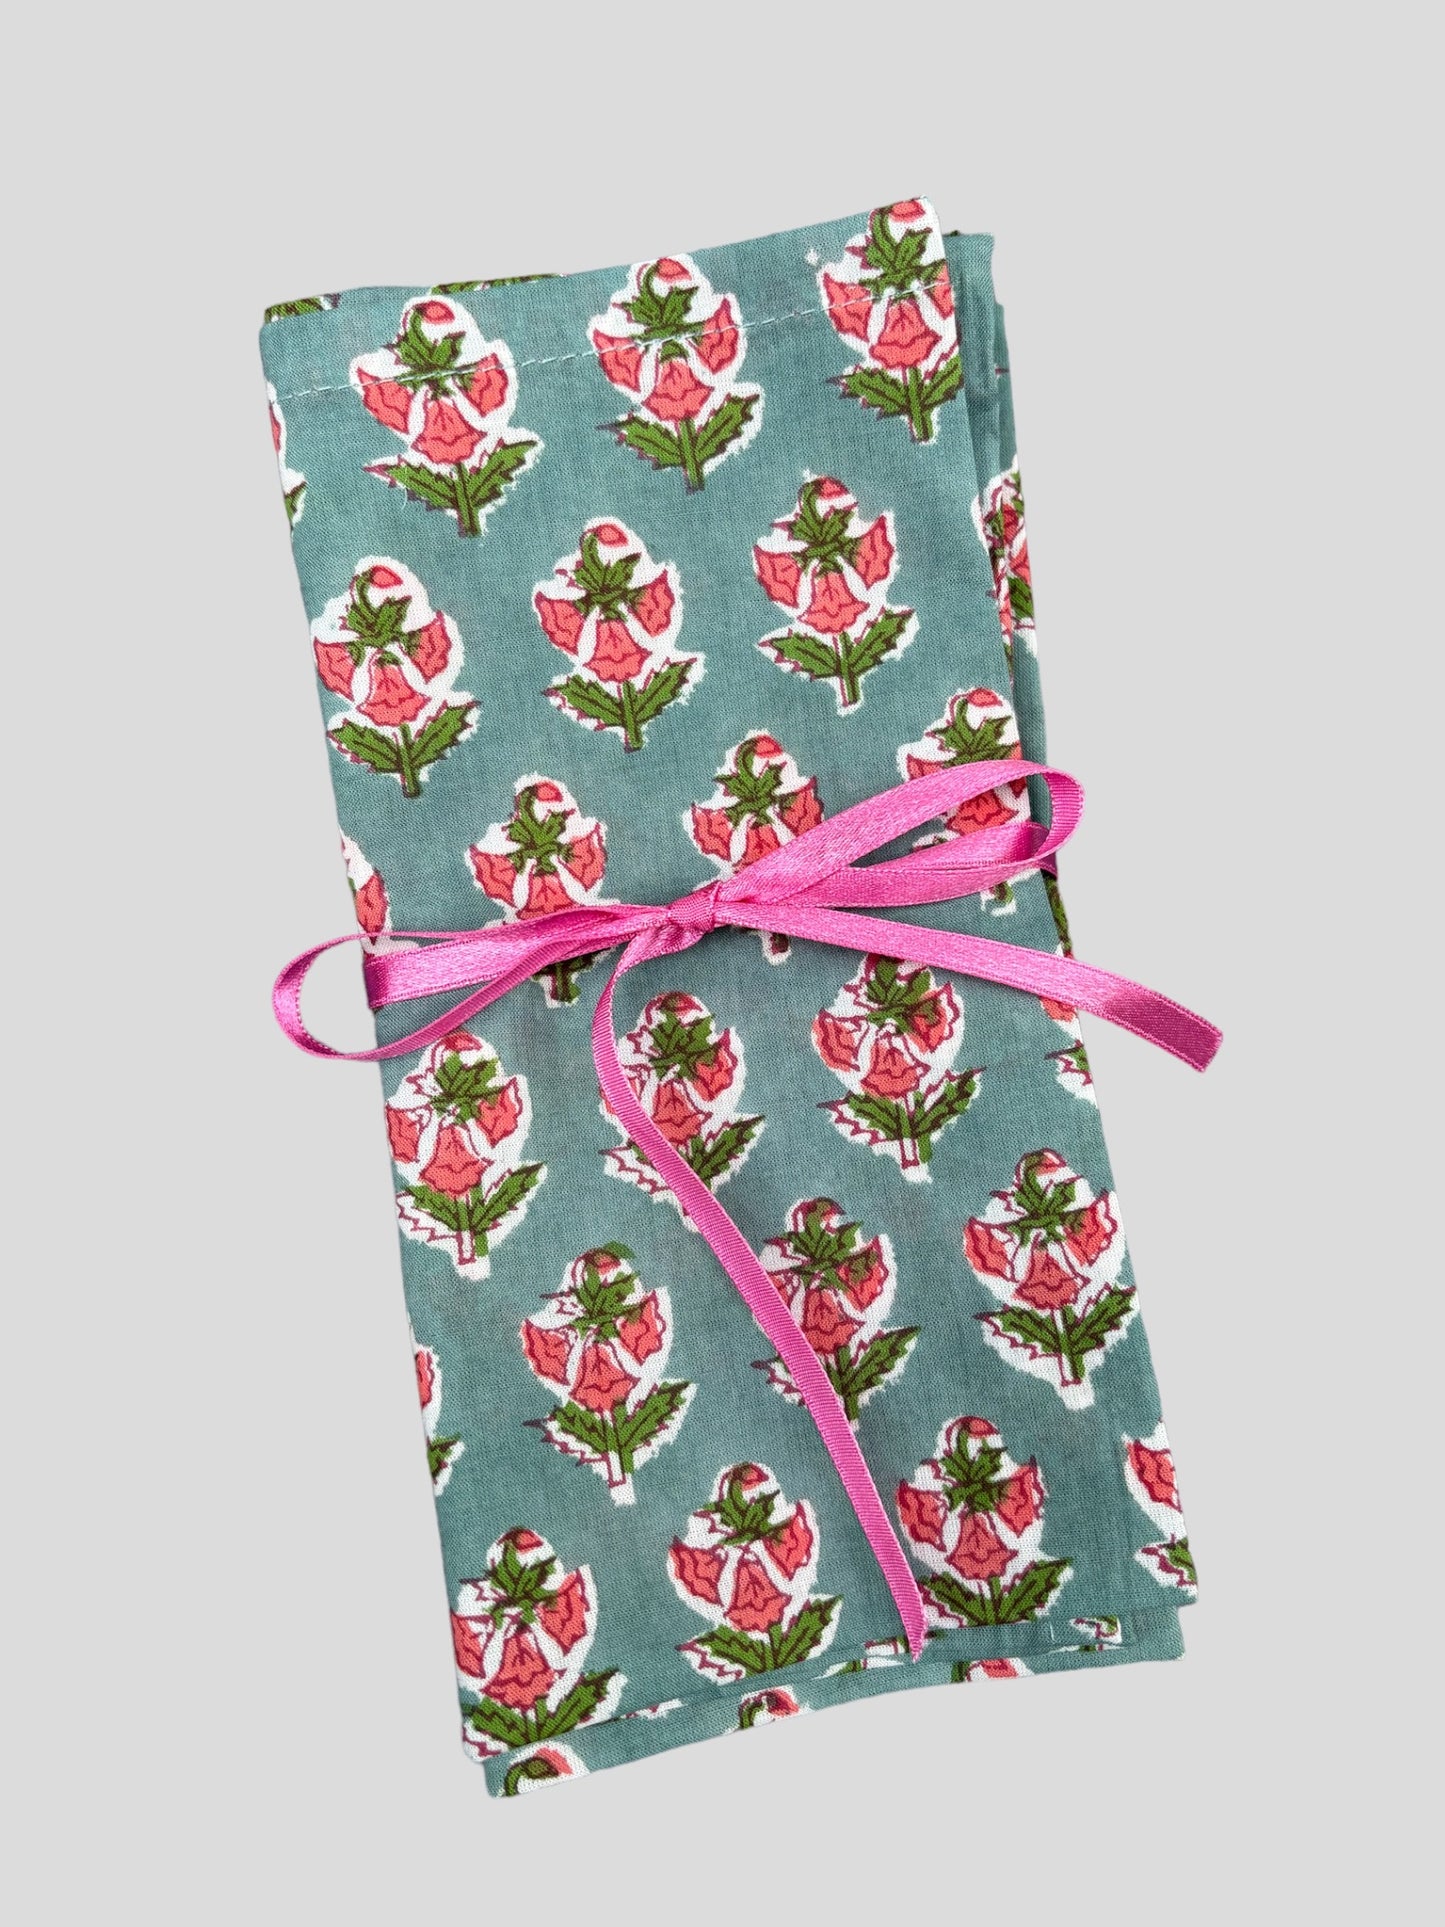 A set of blue and pink floral block print napkins tied with pink ribbon.